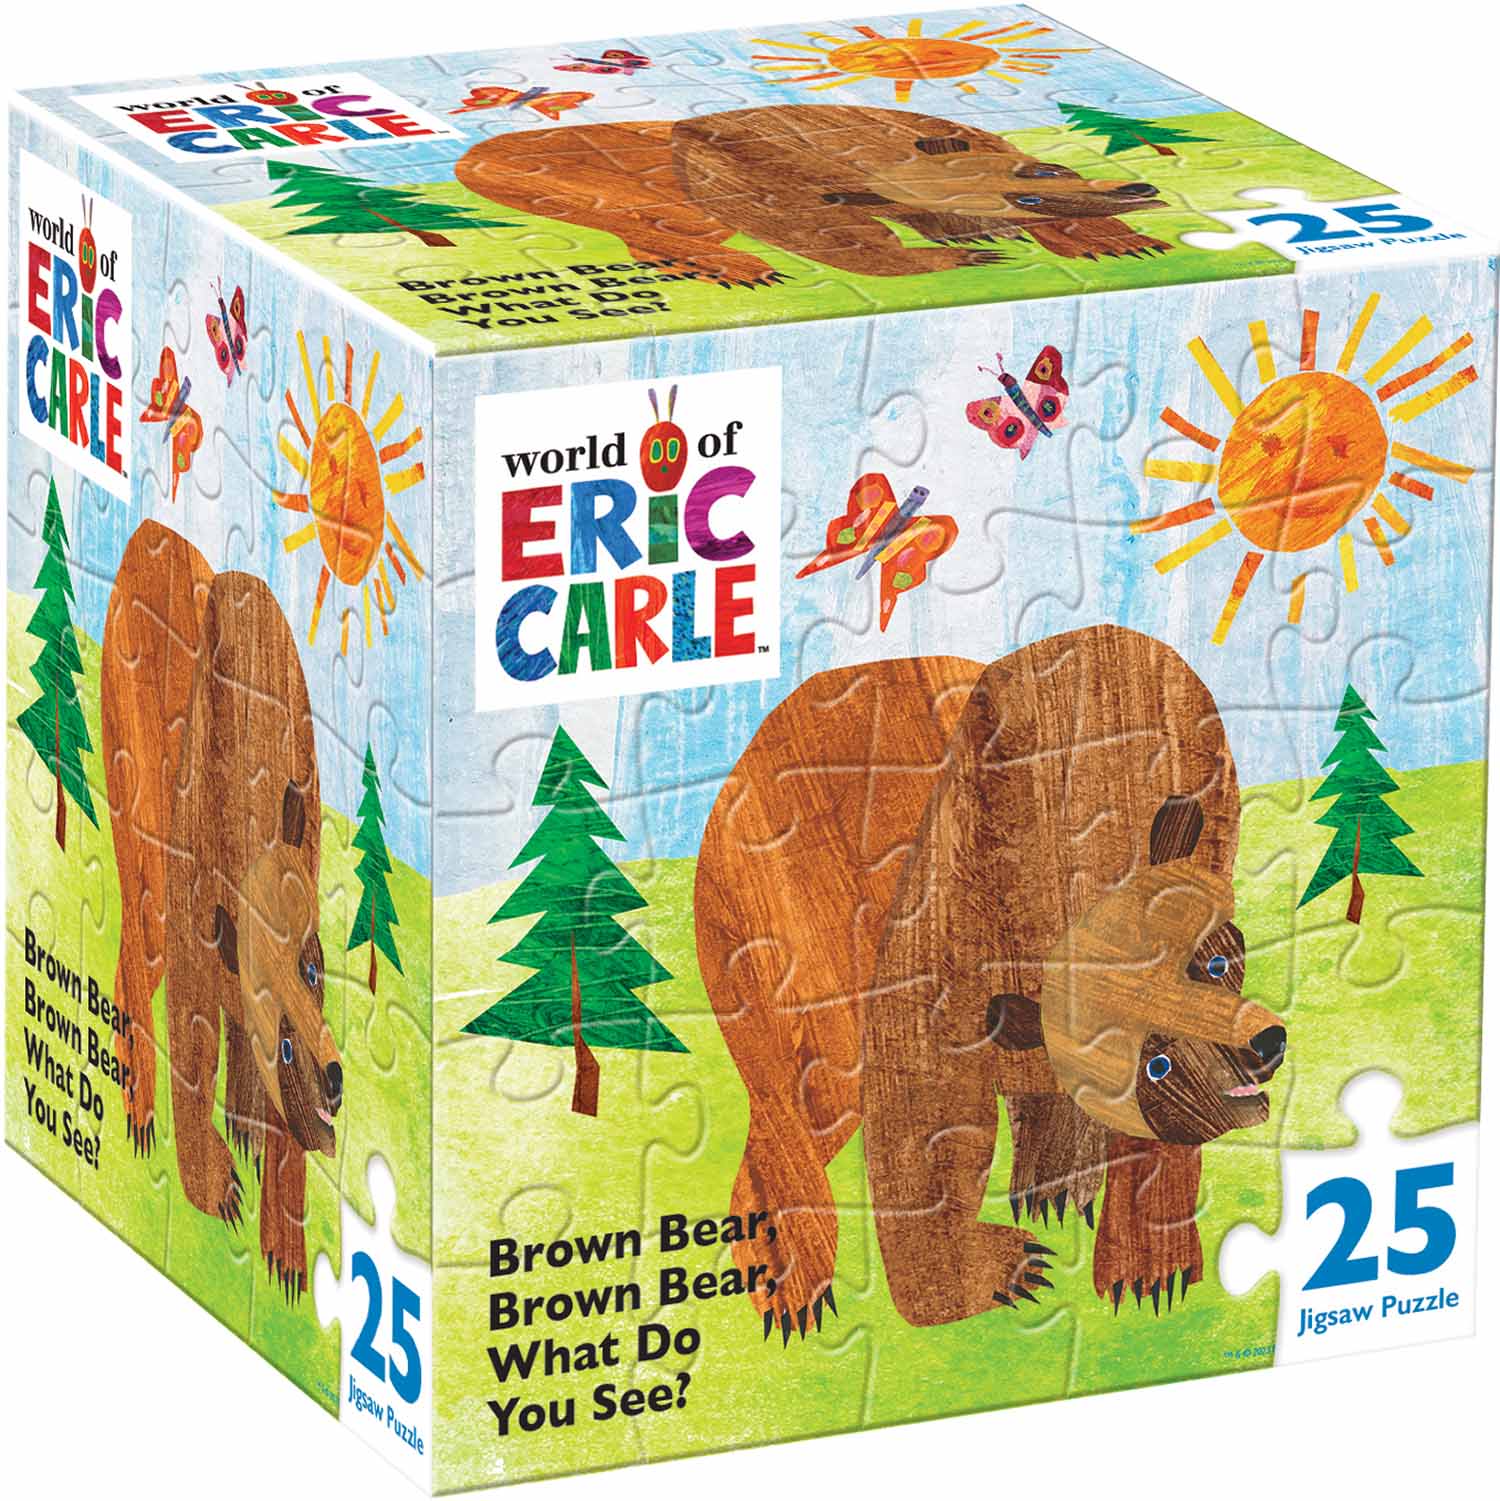 World of Eric Carle - Brown Bear  Educational Jigsaw Puzzle